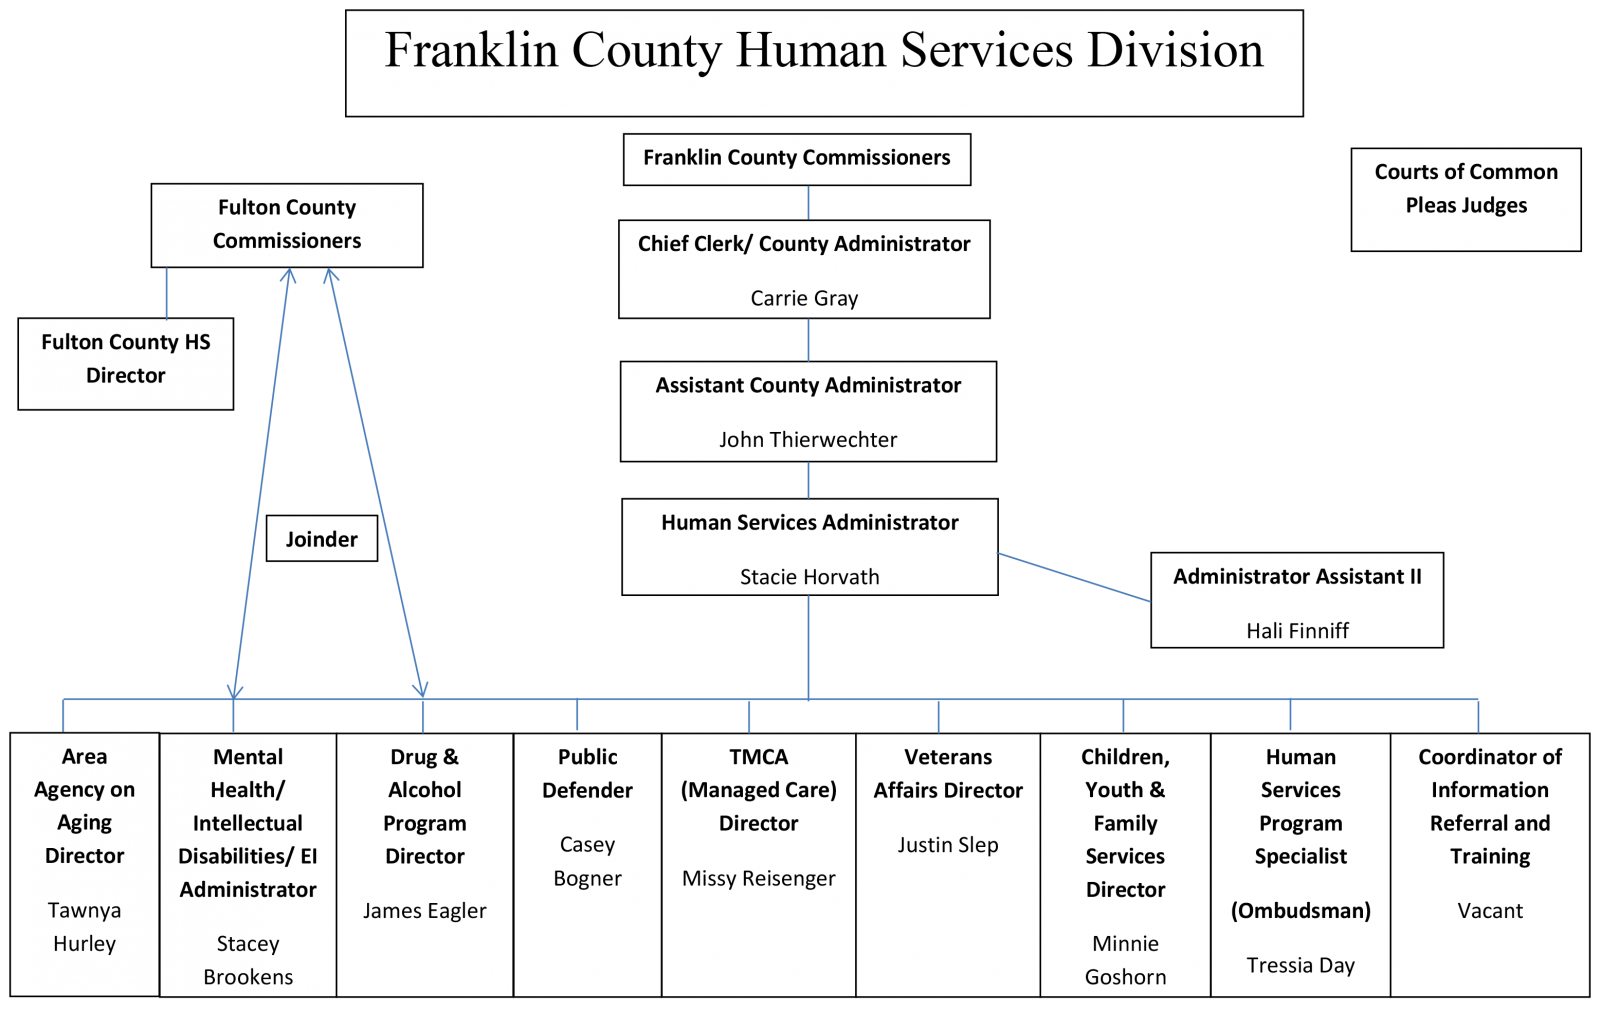 Franklin County Human Services Division